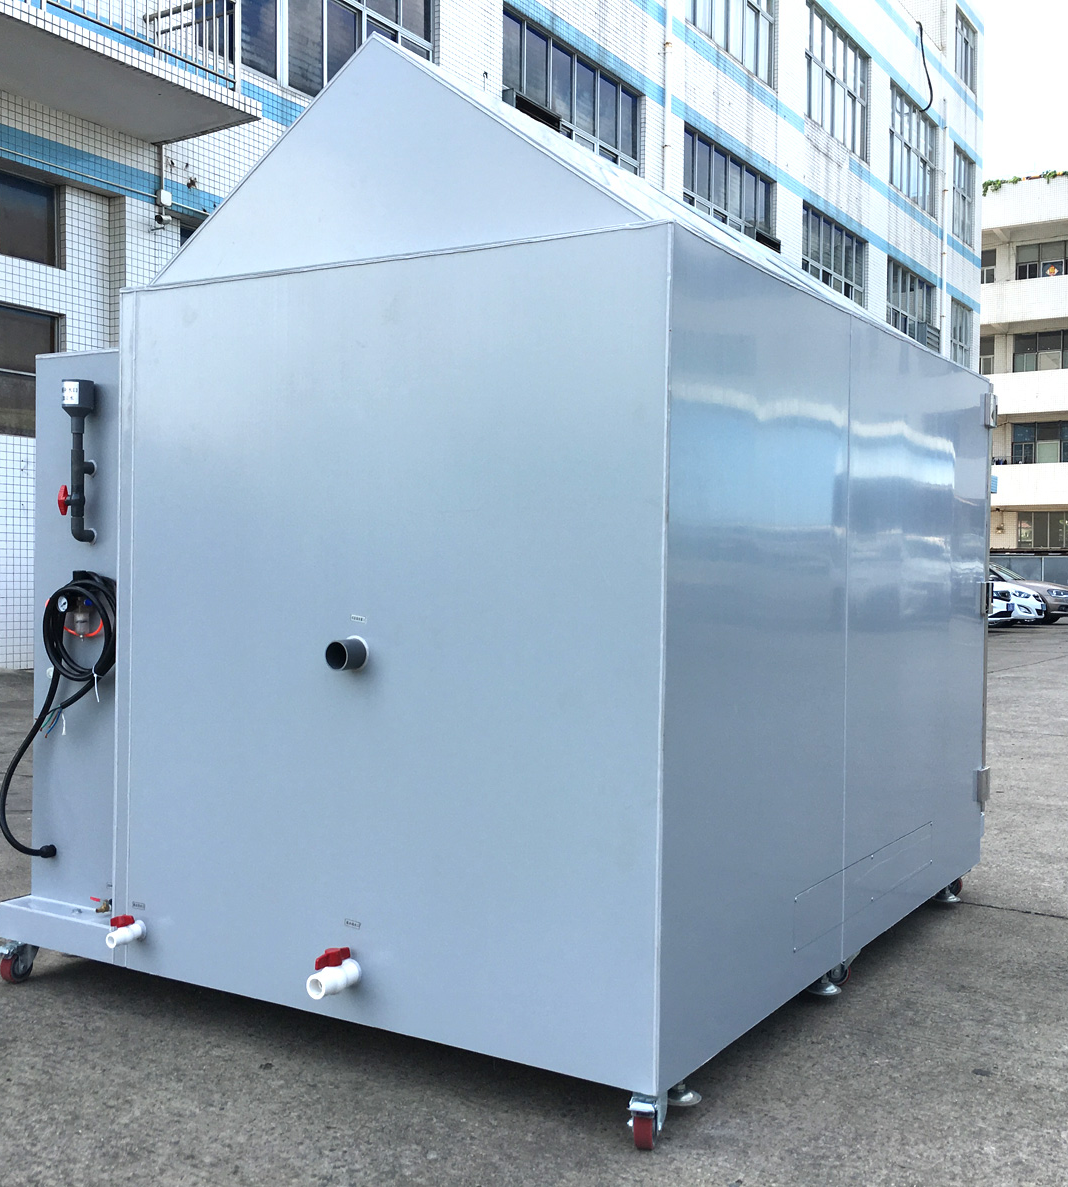 The Benefits of 3 Zones Thermal Shock Test Chamber for Product Quality Evaluation